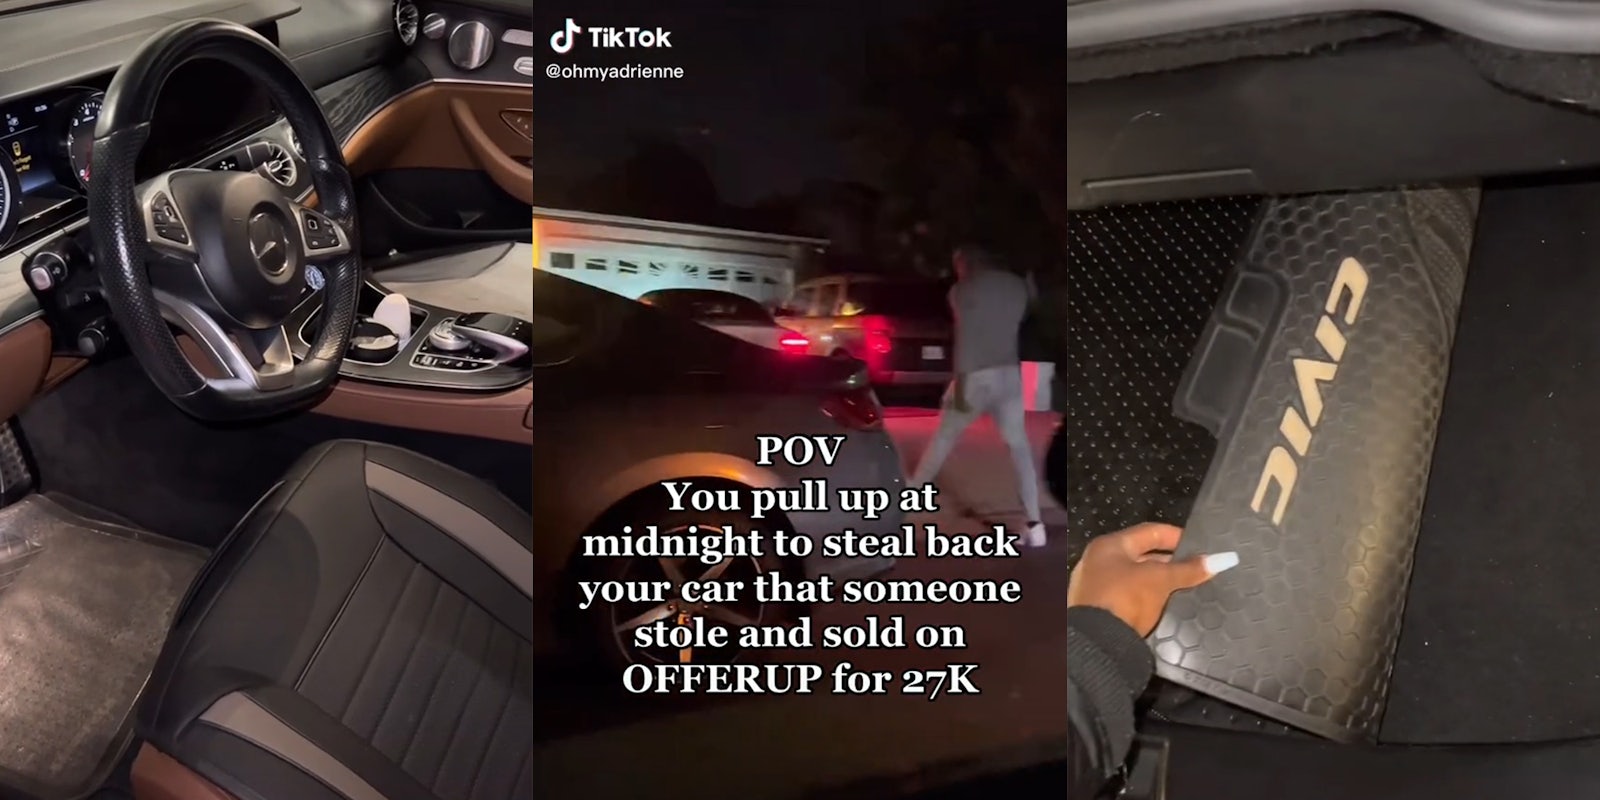 car interior (l) man walking up driveway with caption 'POV You pull up at midnight to steal back your car that someone stole and sold on OFFERUP for 27K' (c) hand revealing 'Civic' logo on floormats in trunk (r)